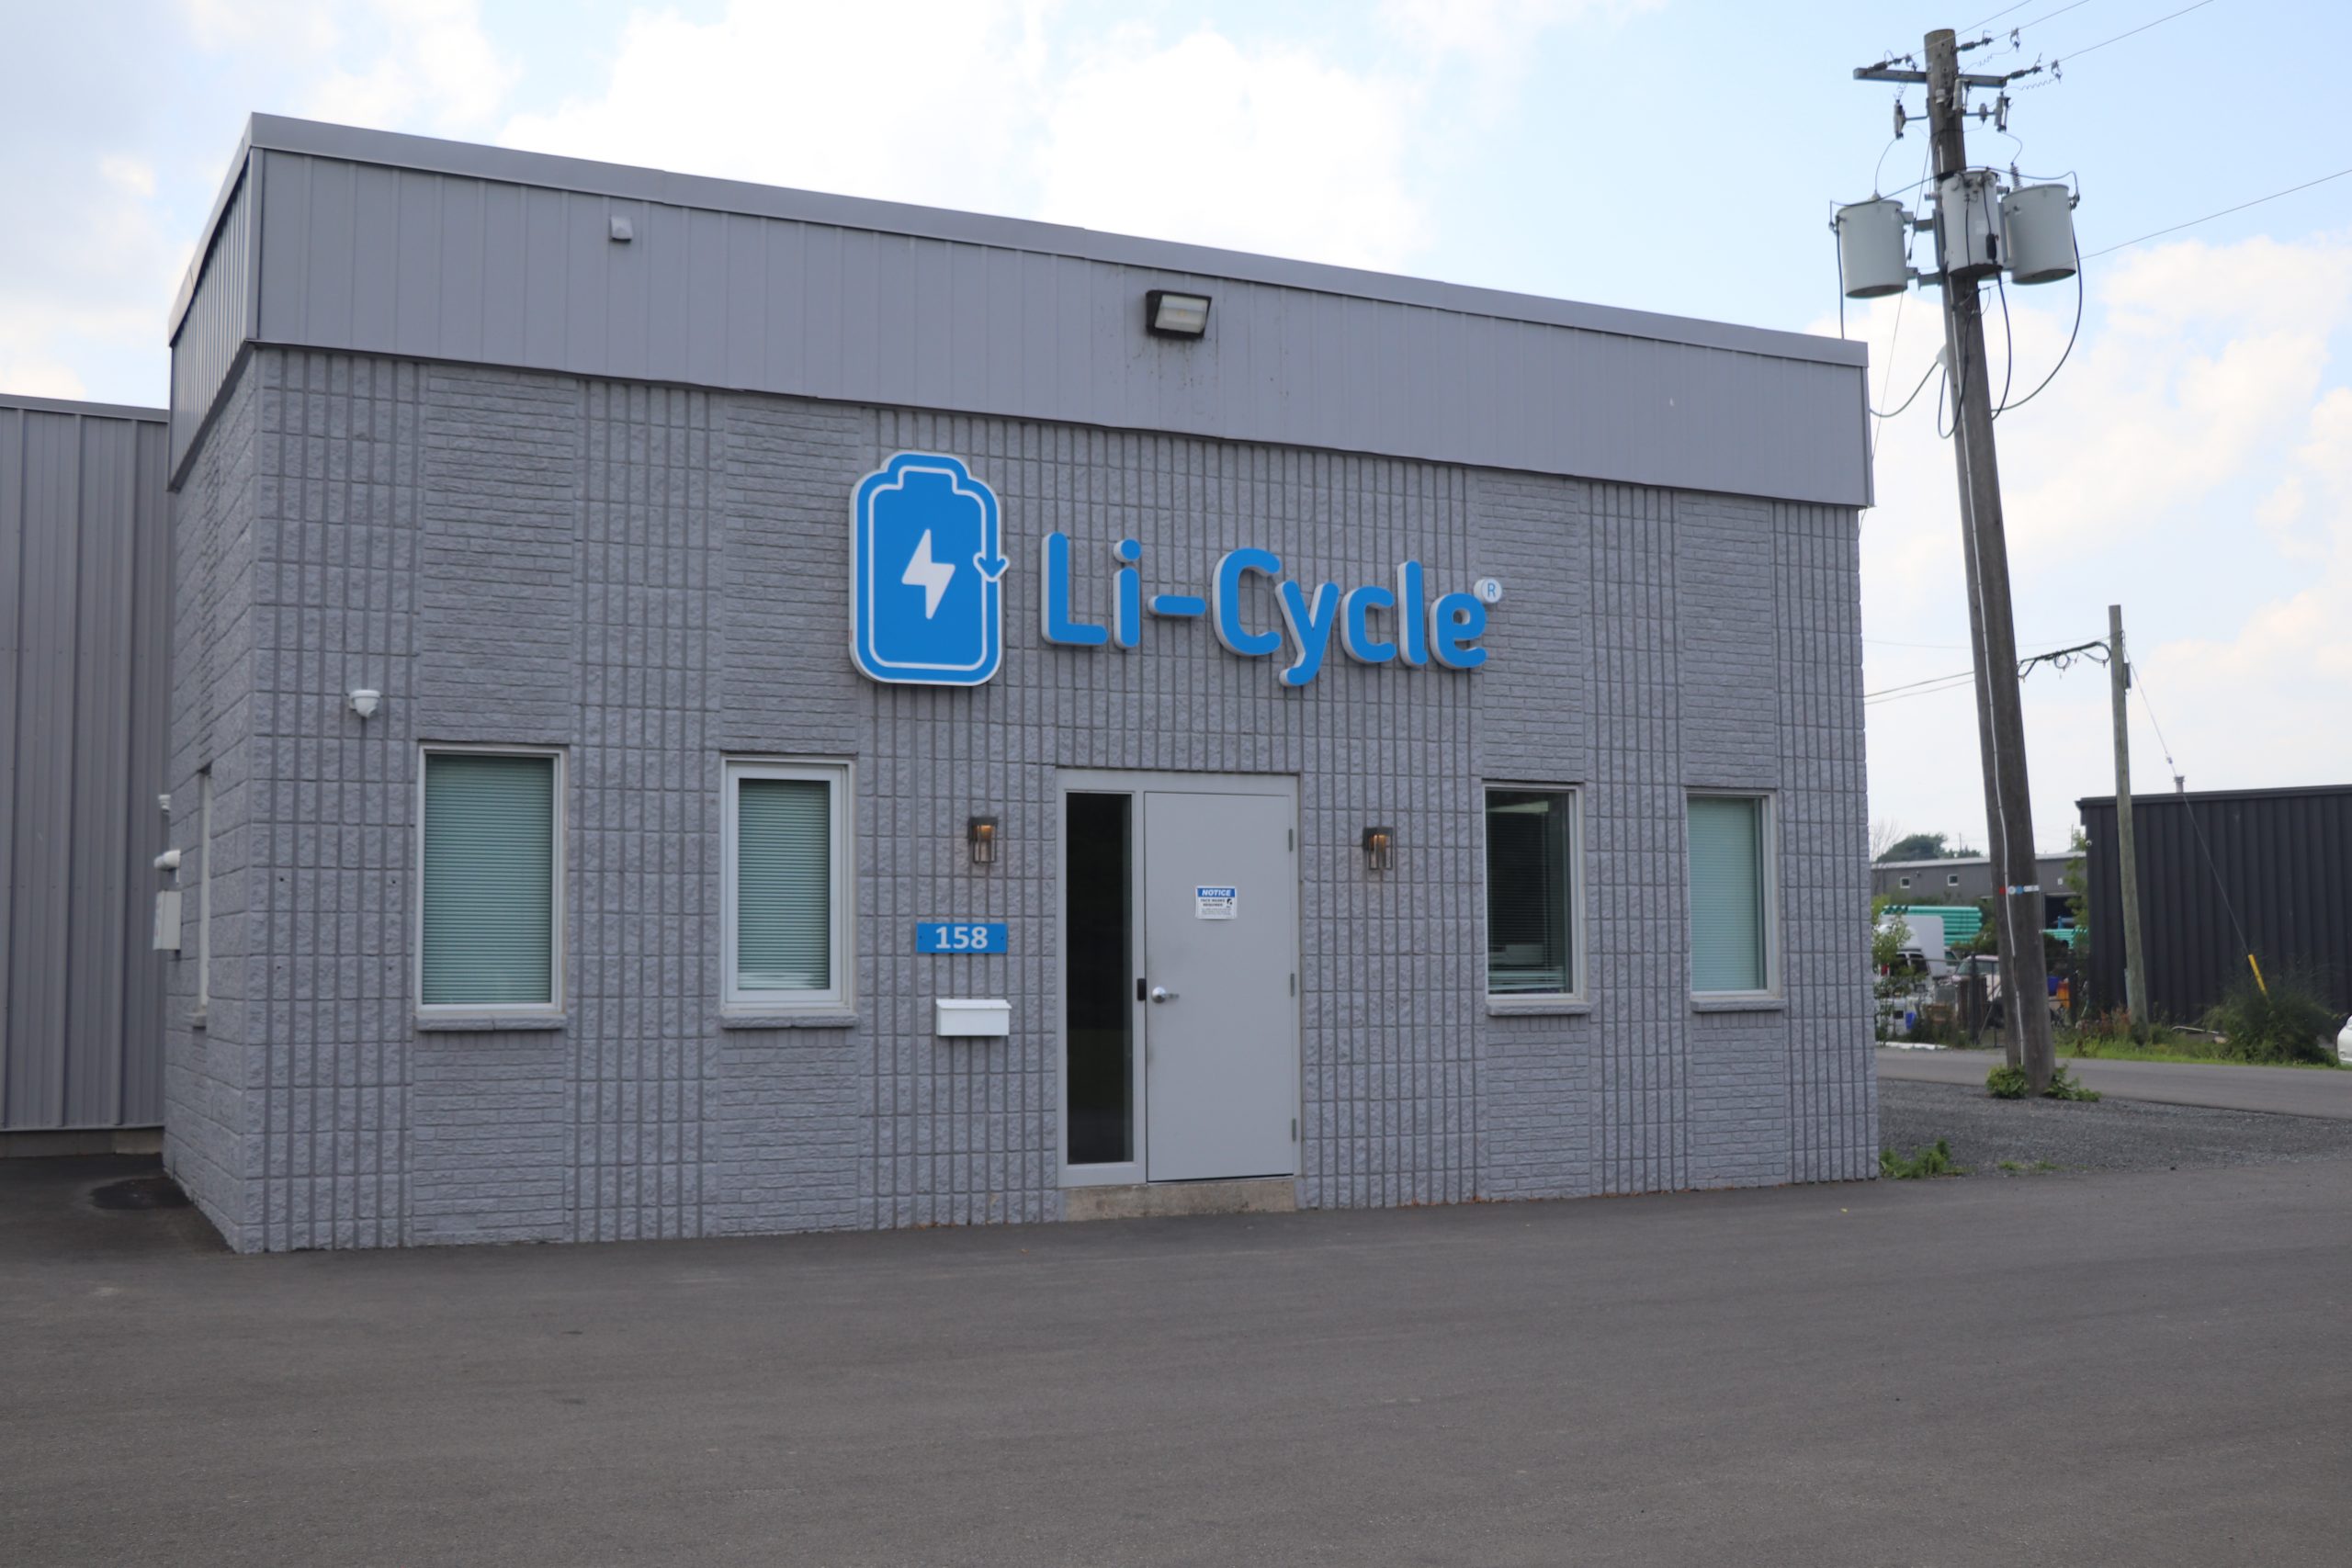 Photo of the exterior of a grey brick industrial building with a blue Li-Cycle logo above the entrance.